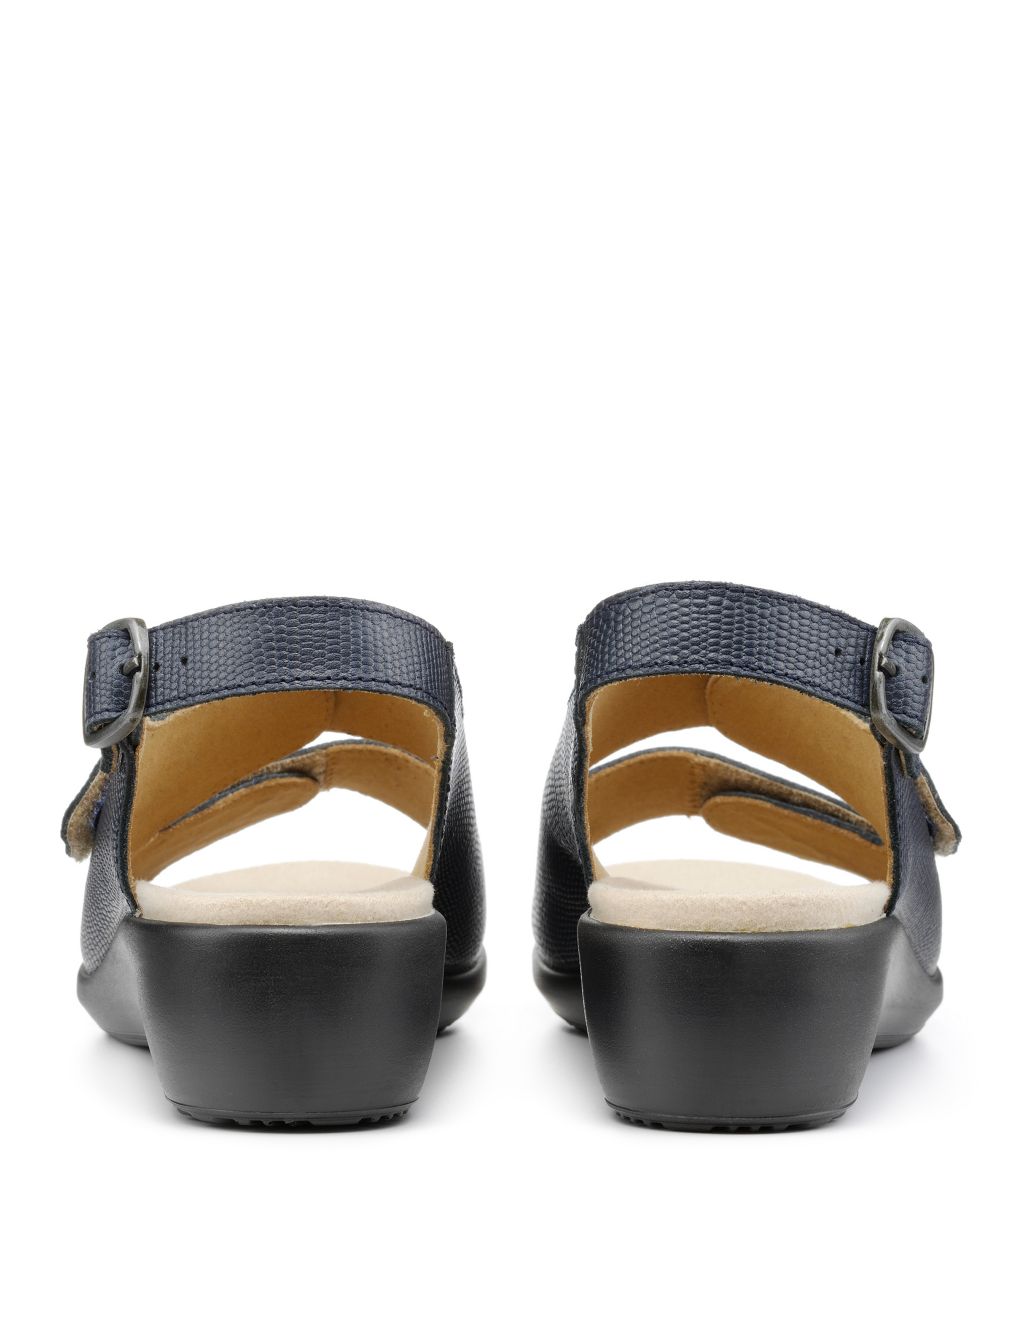 Easy II Wide Fit Leather Wedge Sandals image 4